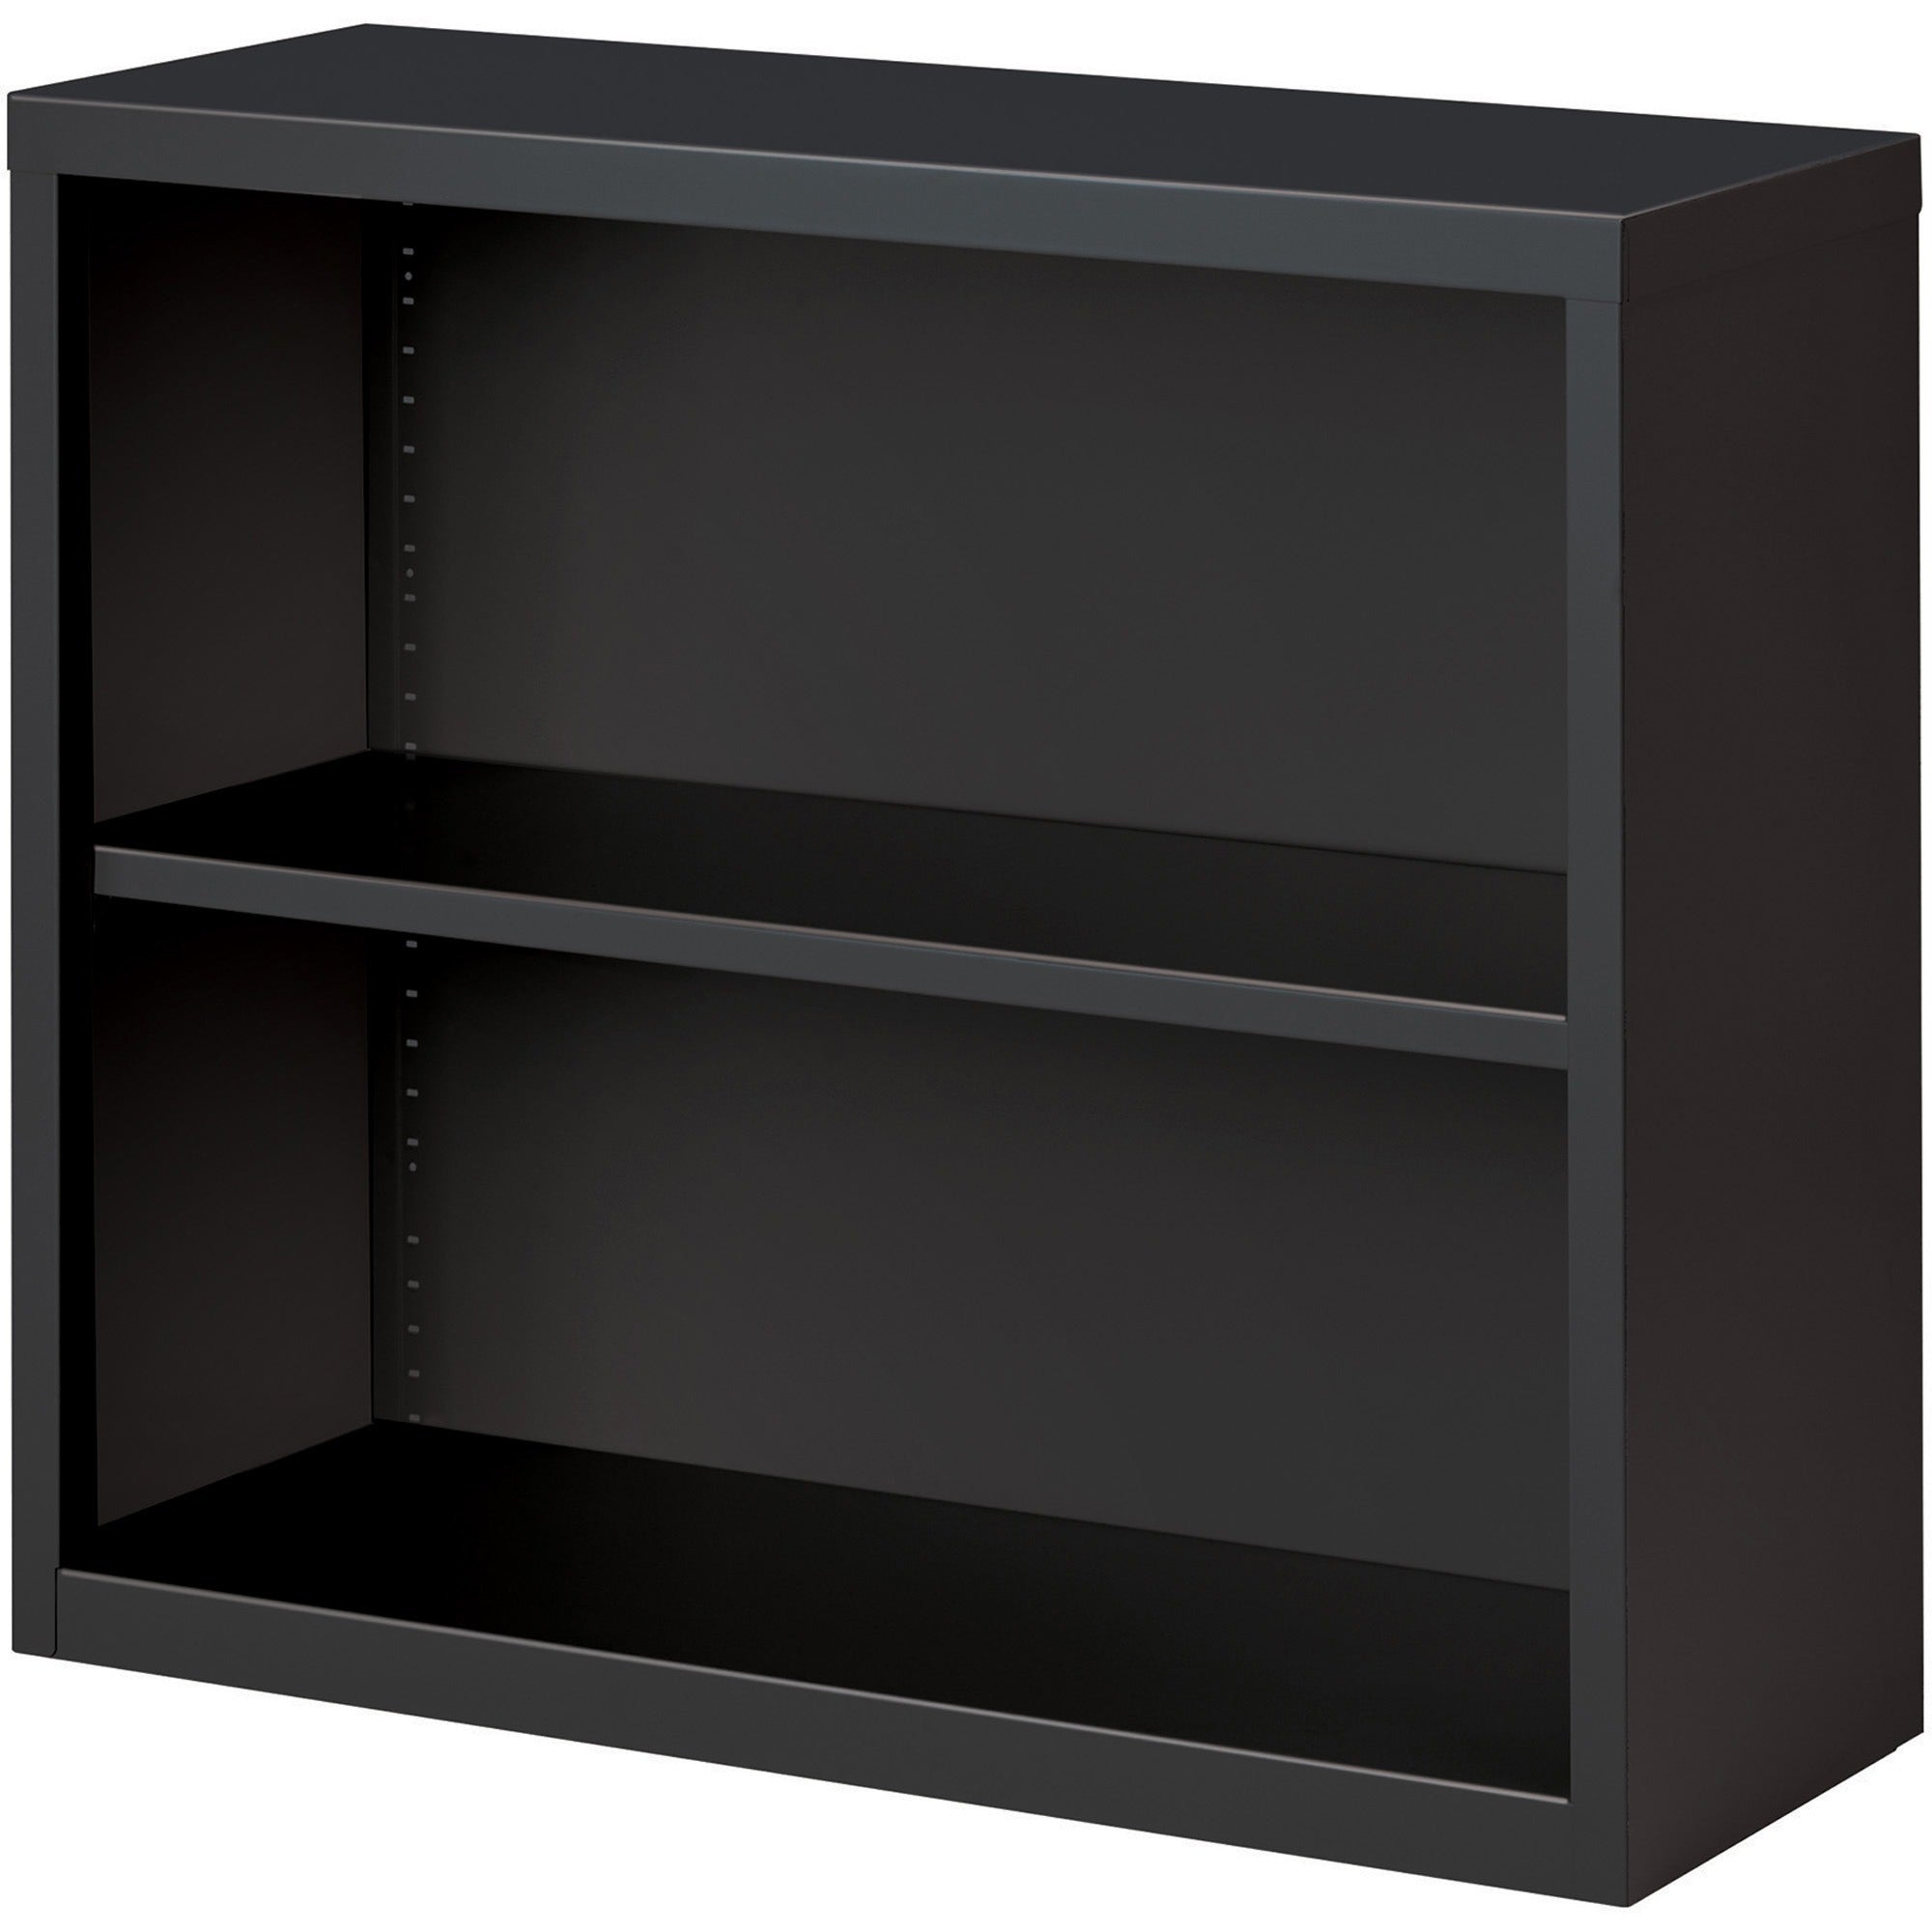 lorell-fortress-series-bookcase-345-x-12630-2-shelves-material-steel-finish-charcoal-powder-coated-adjustable-shelf-welded-durable_llr59691 - 3